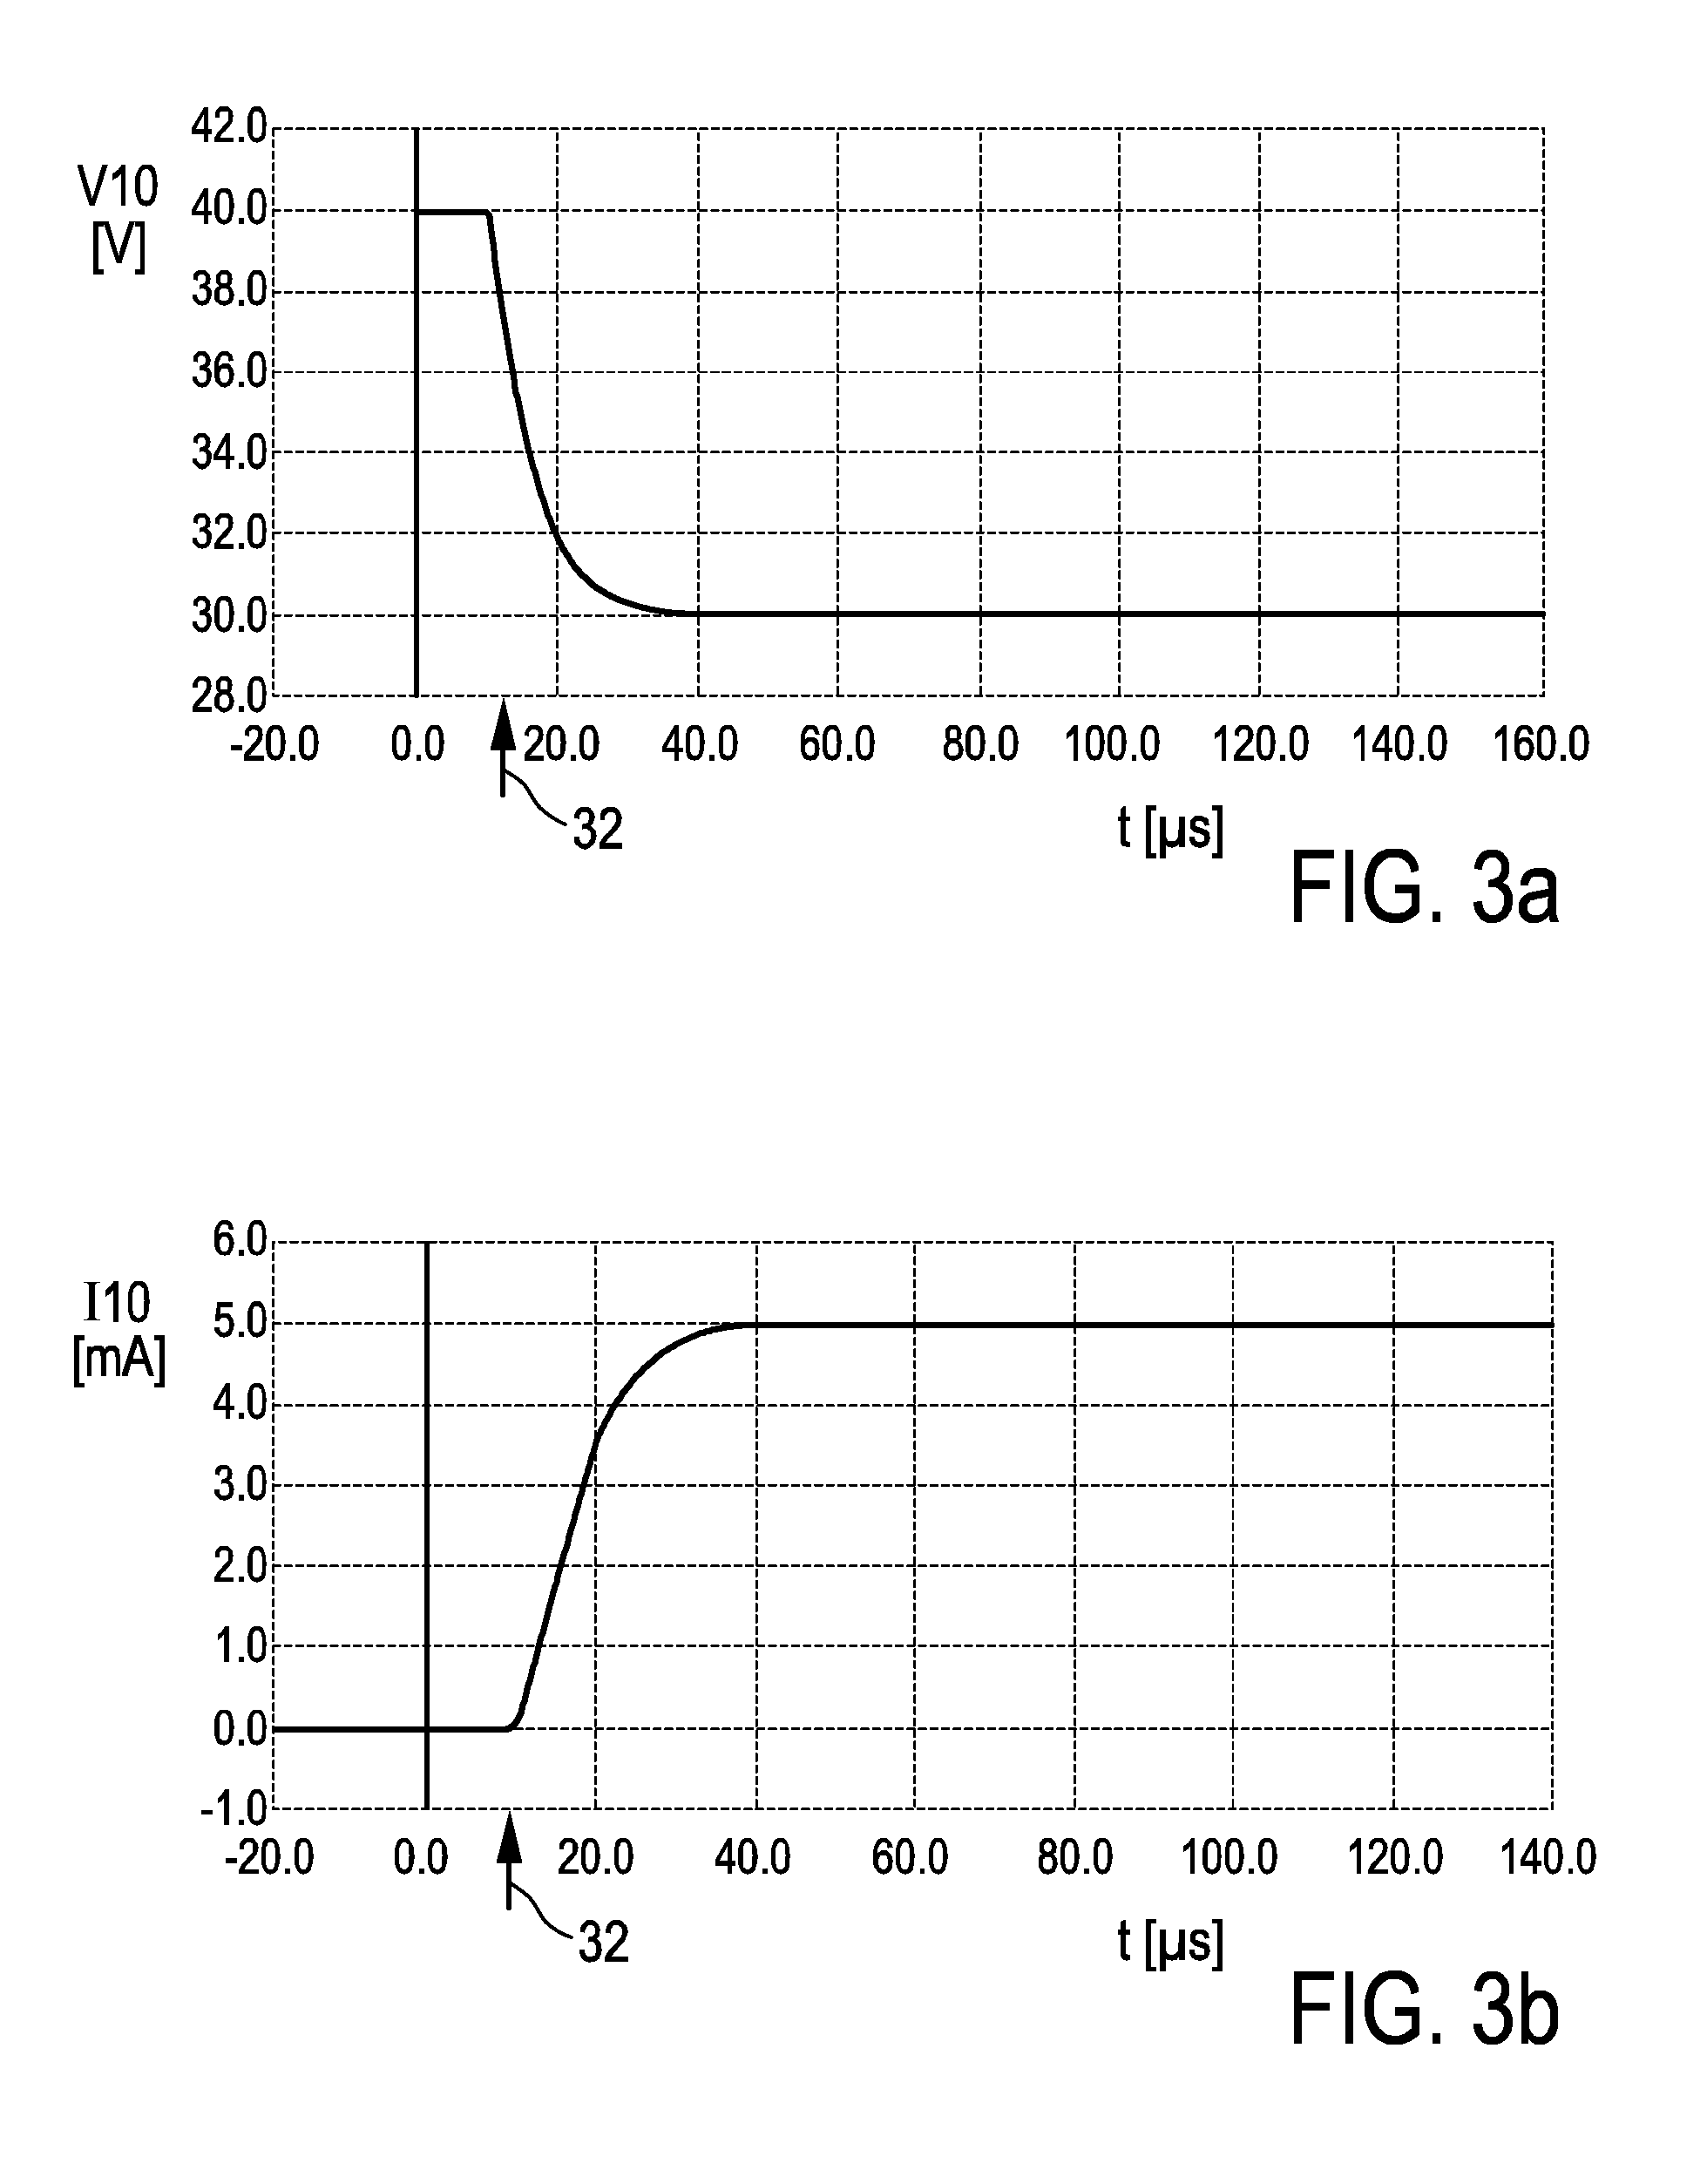 Ultrasound tranducer assembly and method for driving an ultrasound transducer head